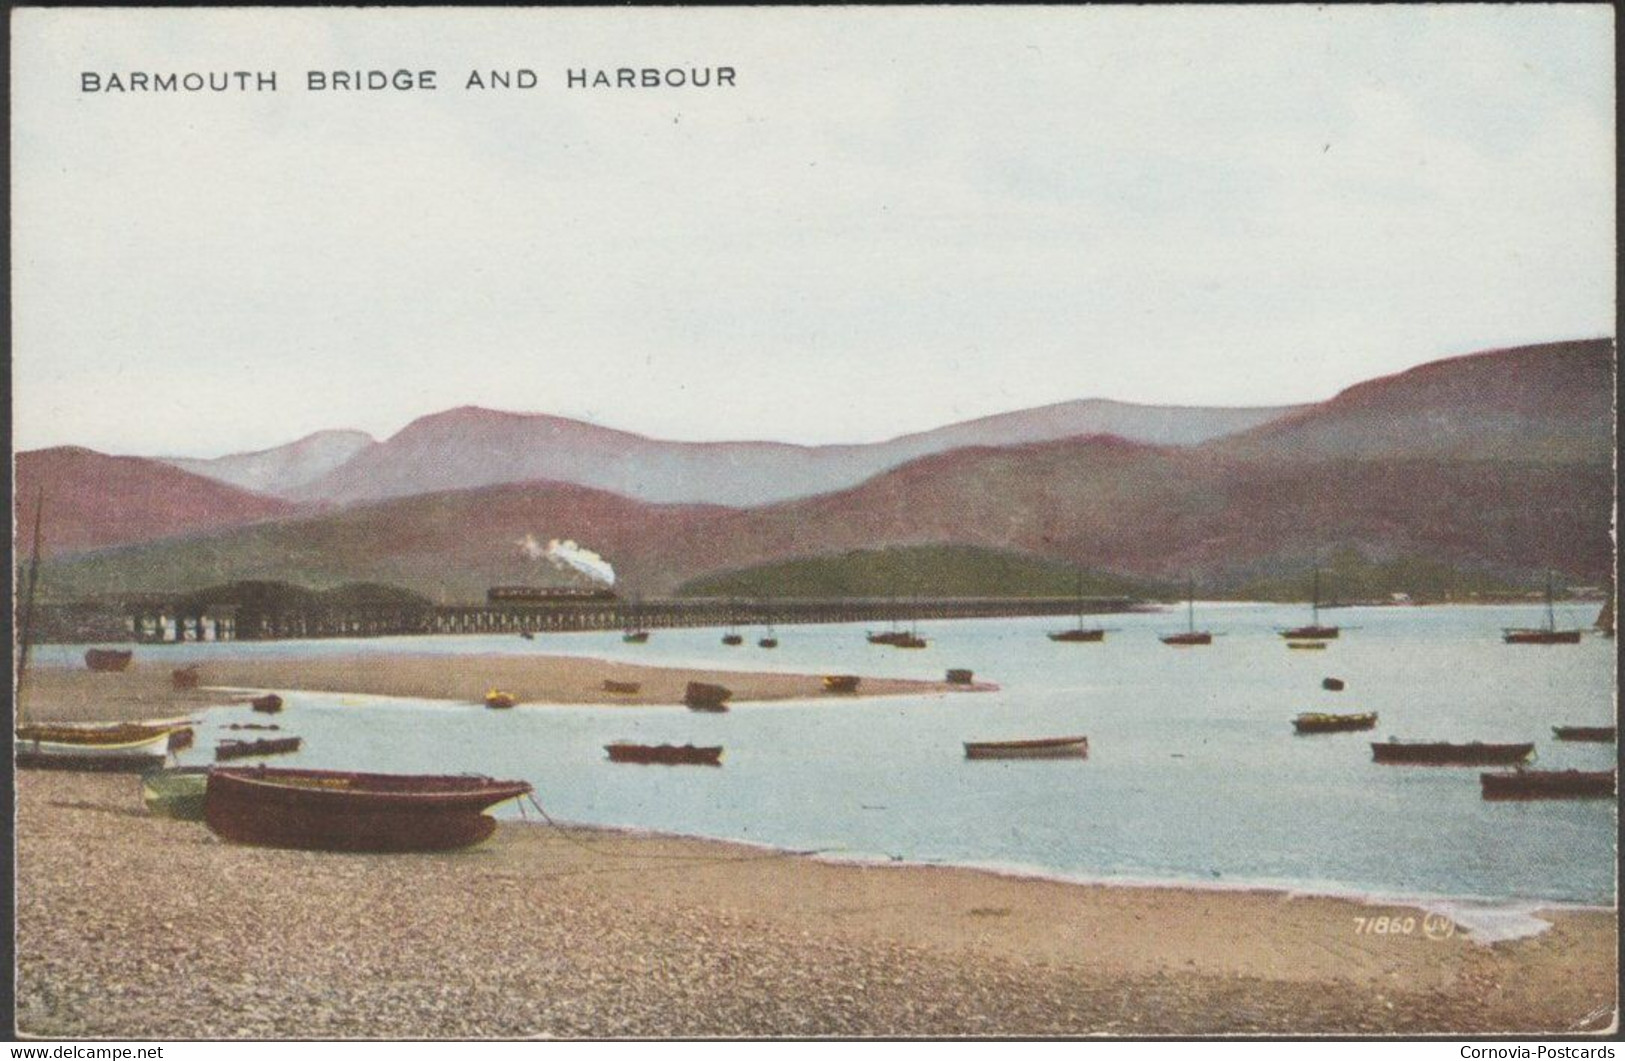 Barmouth Bridge And Harbour, Merionethshire, 1925 - Valentine's Valesque Postcard - Merionethshire